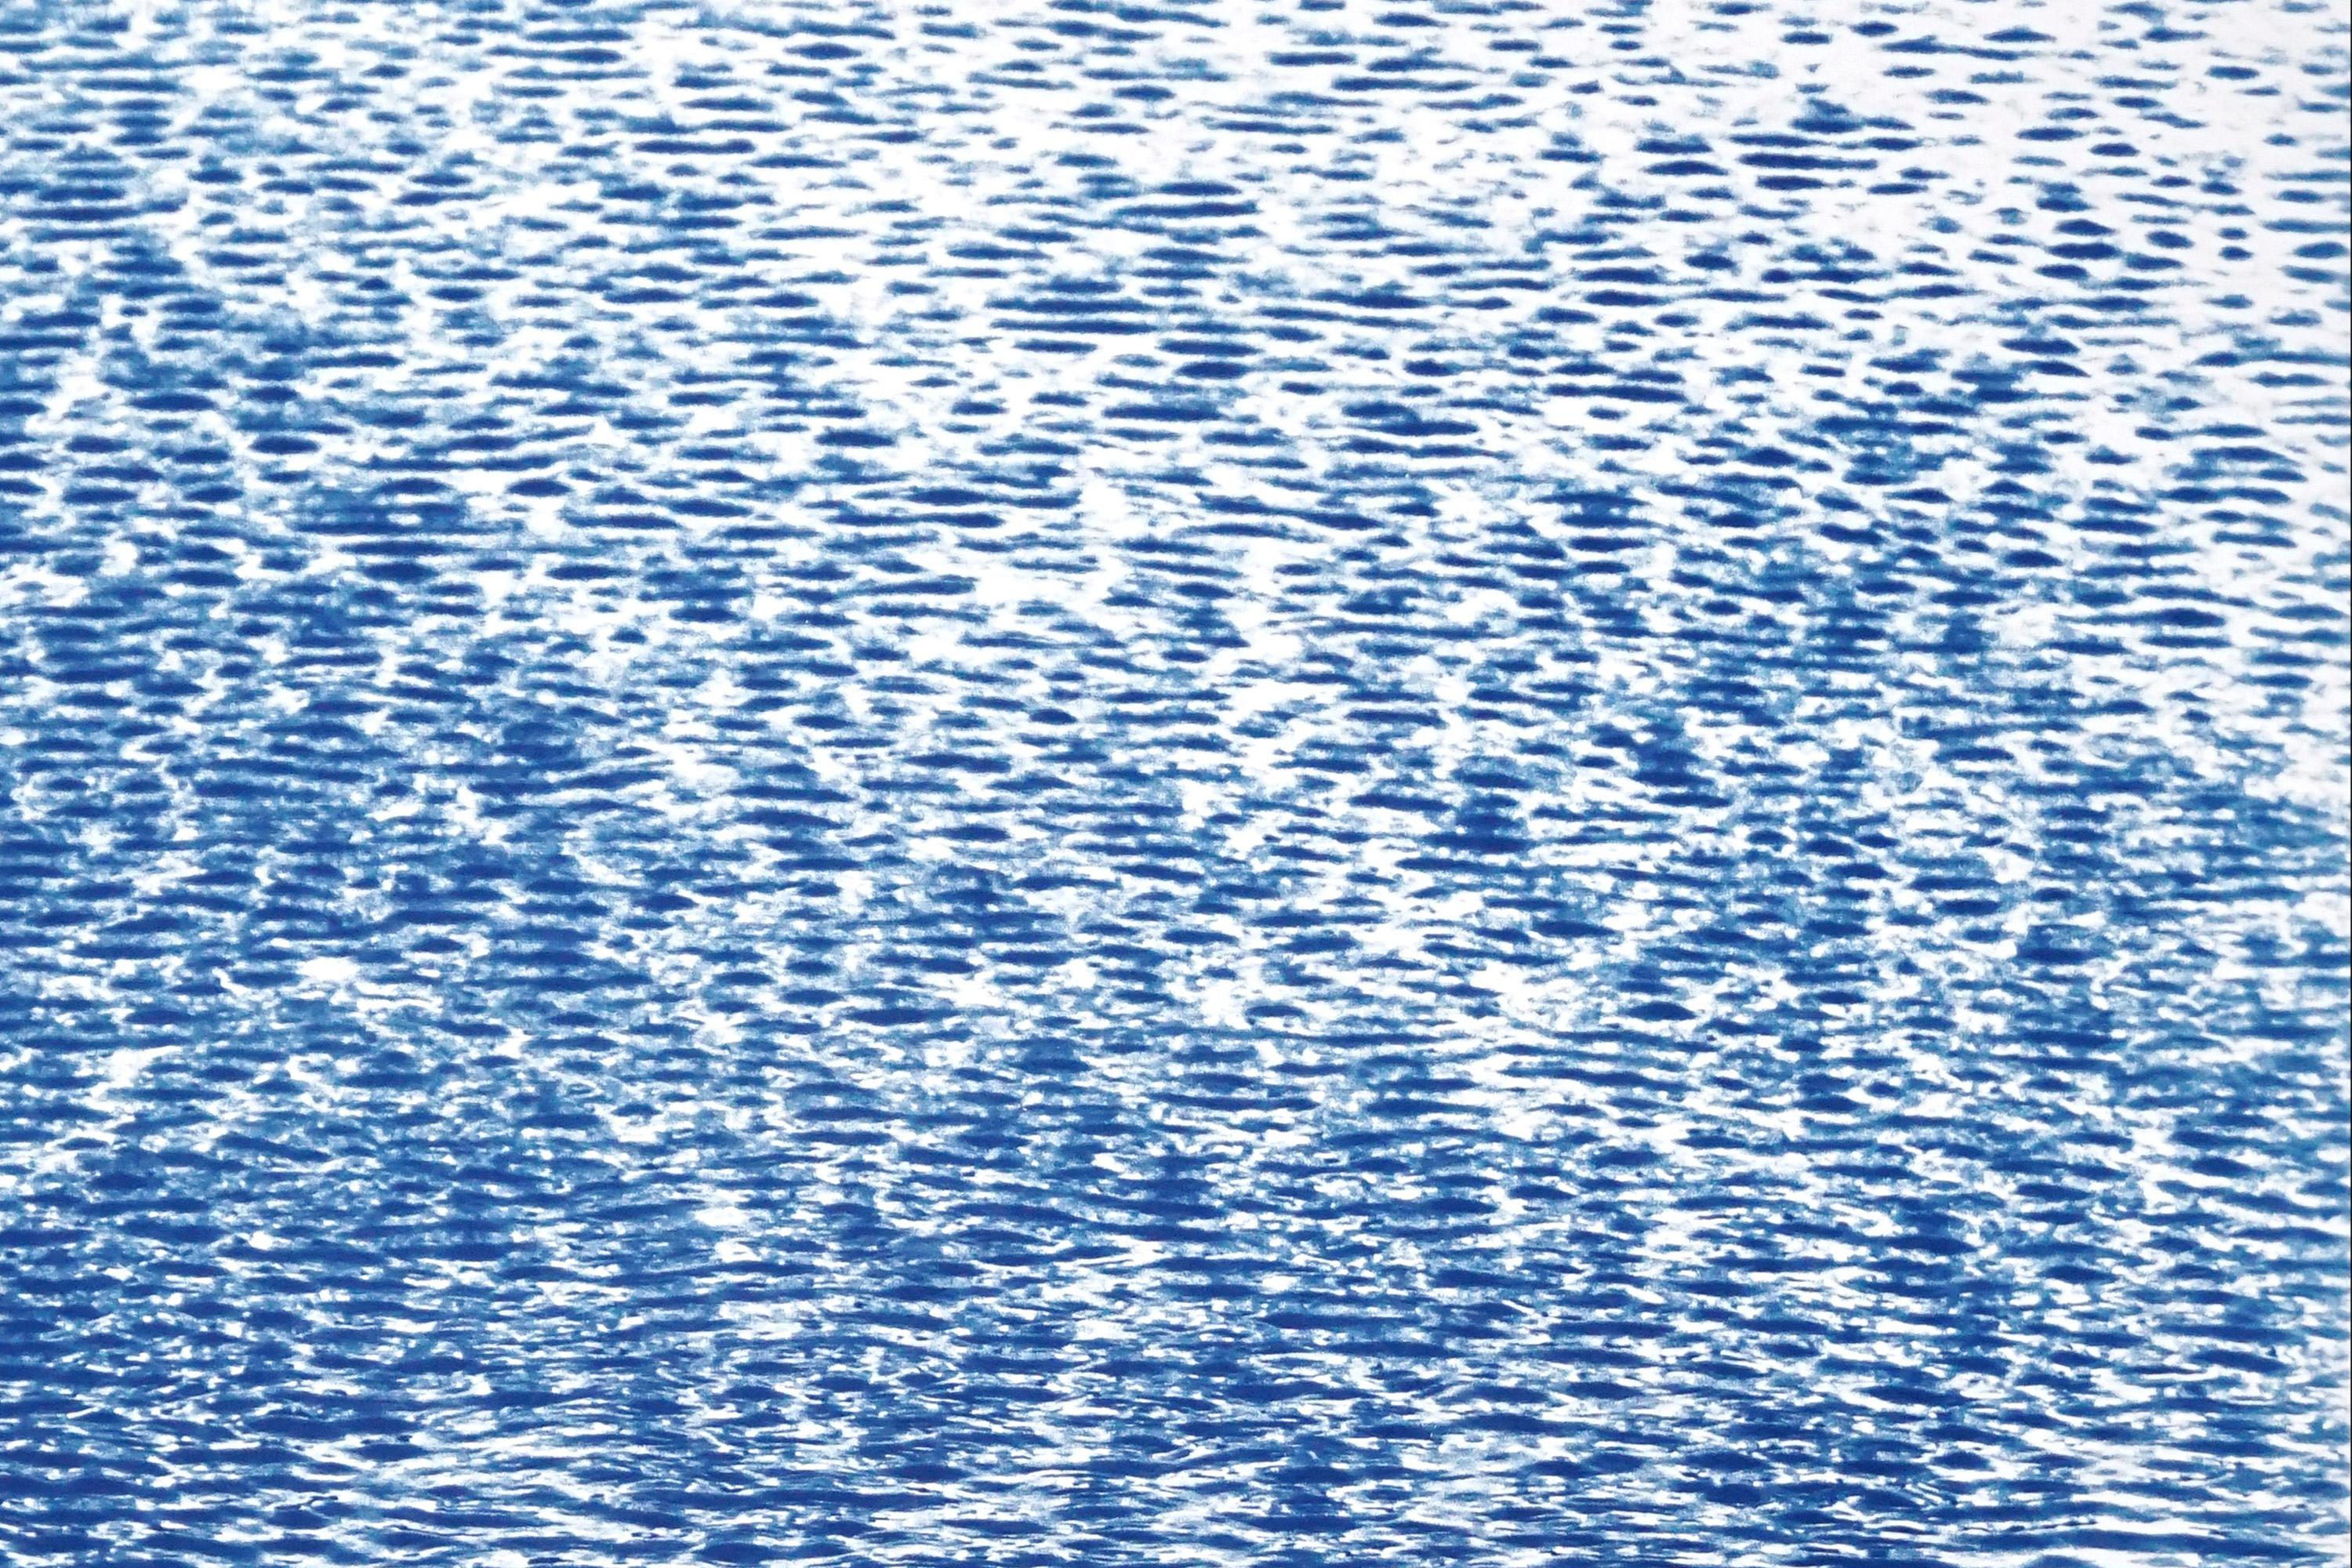 Serene Cove Waters, Feng Shui Seascape, Blue and White Ripples, Horizontal Print - Abstract Painting by Kind of Cyan